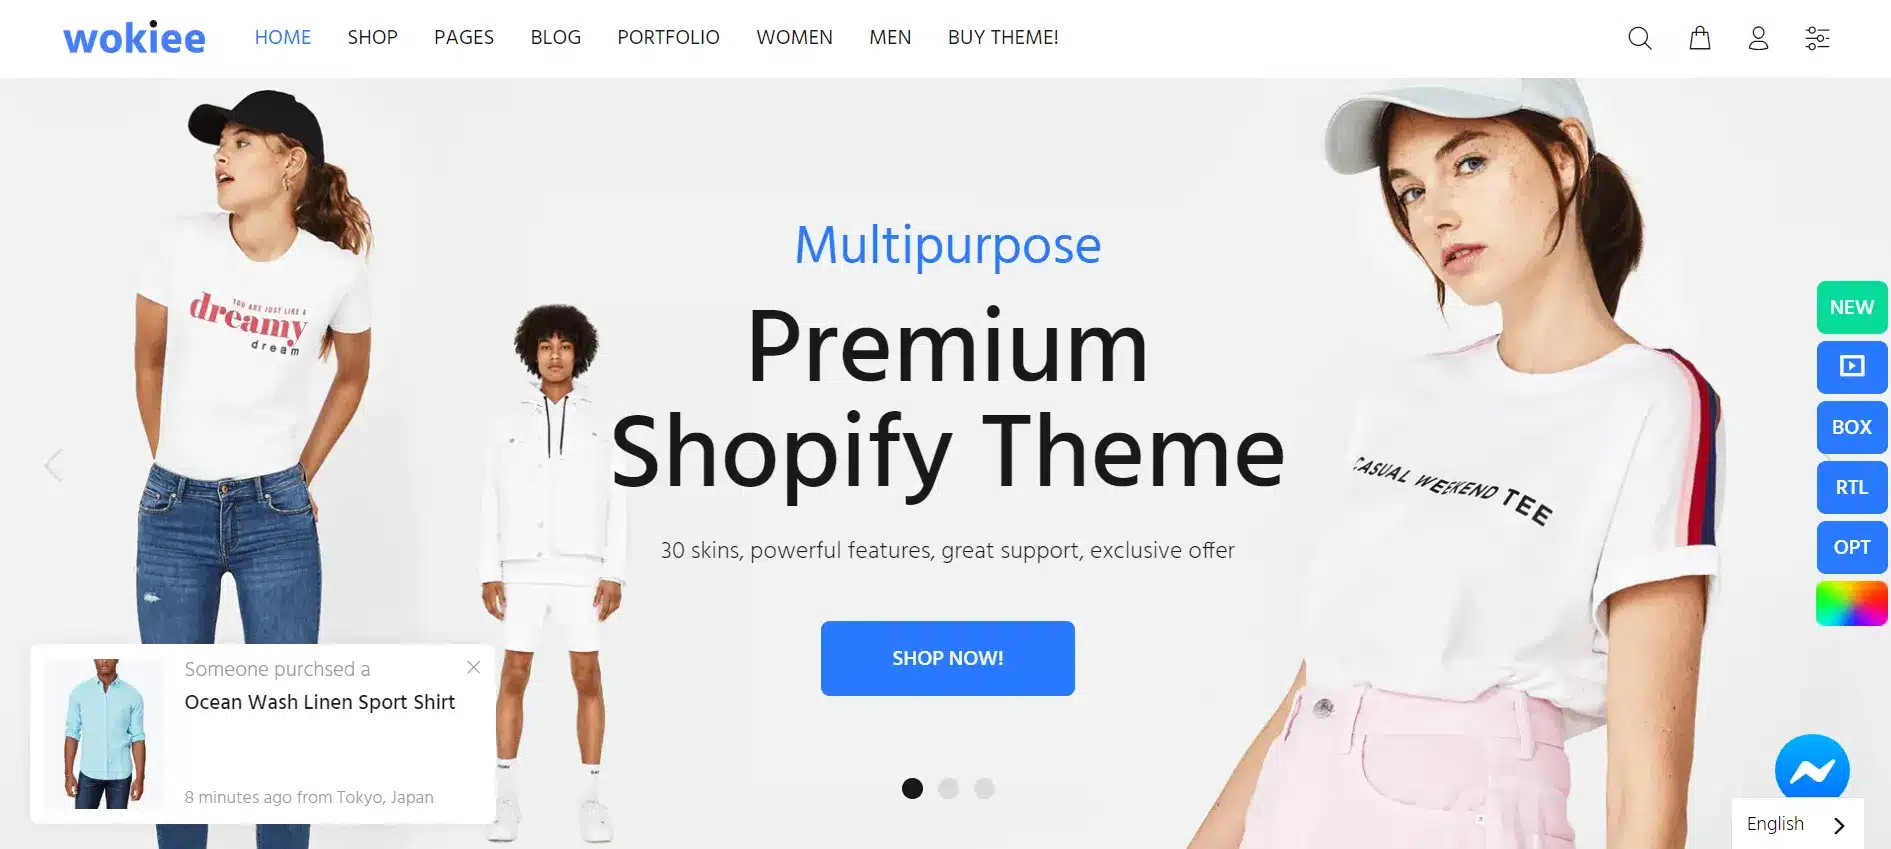 Best Shopify themes for Conversion Wokiee